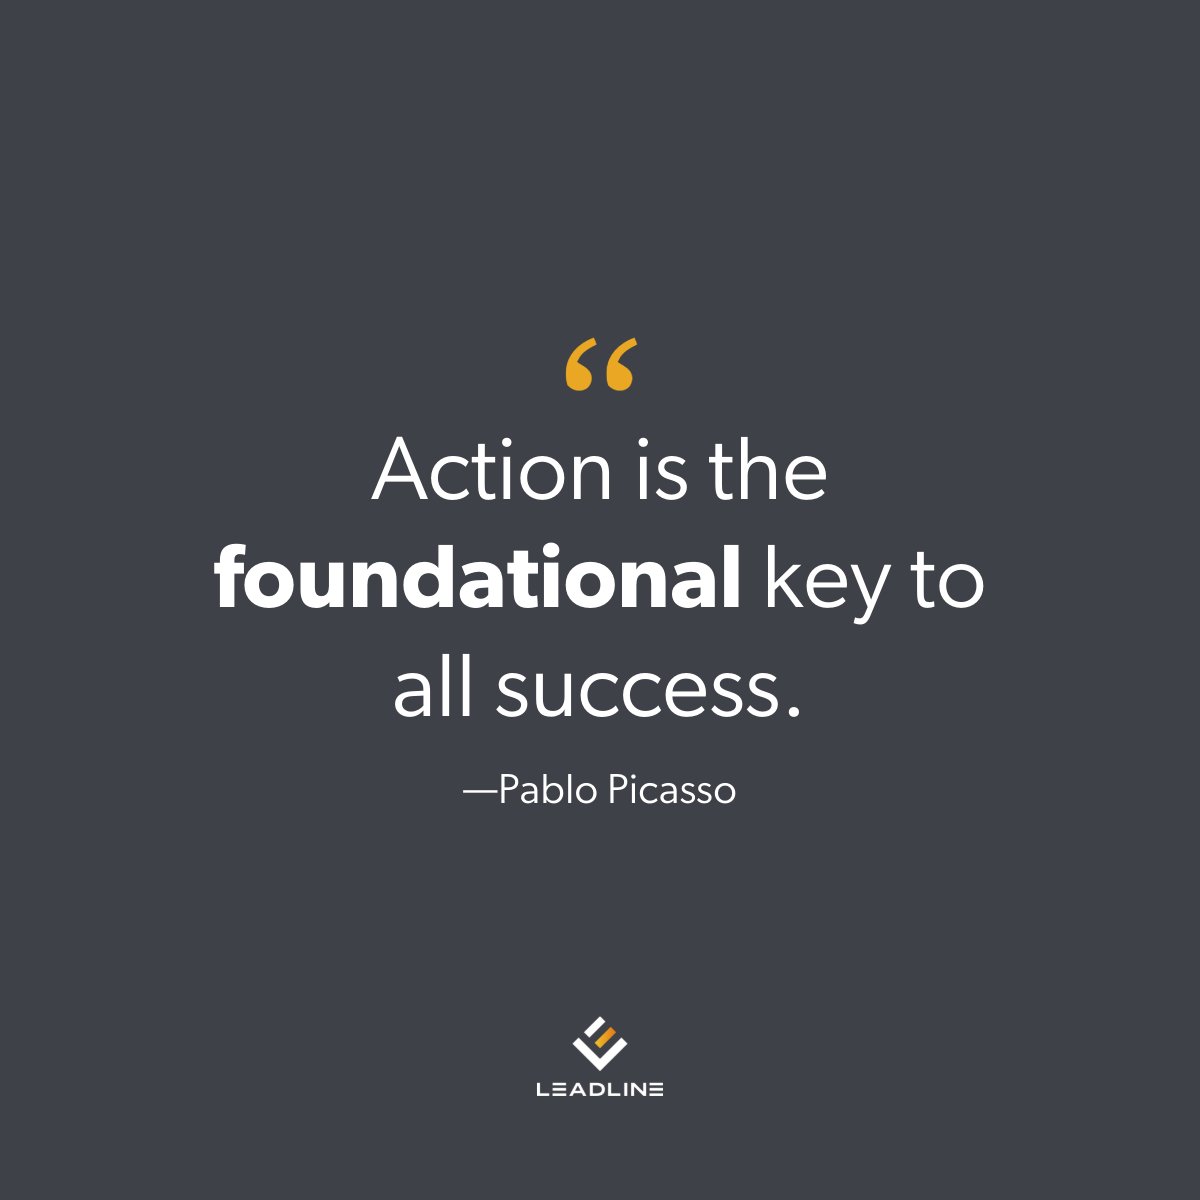 'Action is the foundational key to all success.' 
—Pablo Picasso

If you want to take action toward your recruitment goals, Leadline can be your secret weapon.

#MondayMotivation #MakeItHappen #GetLeadline #Recruiting #RecruitingSoftware